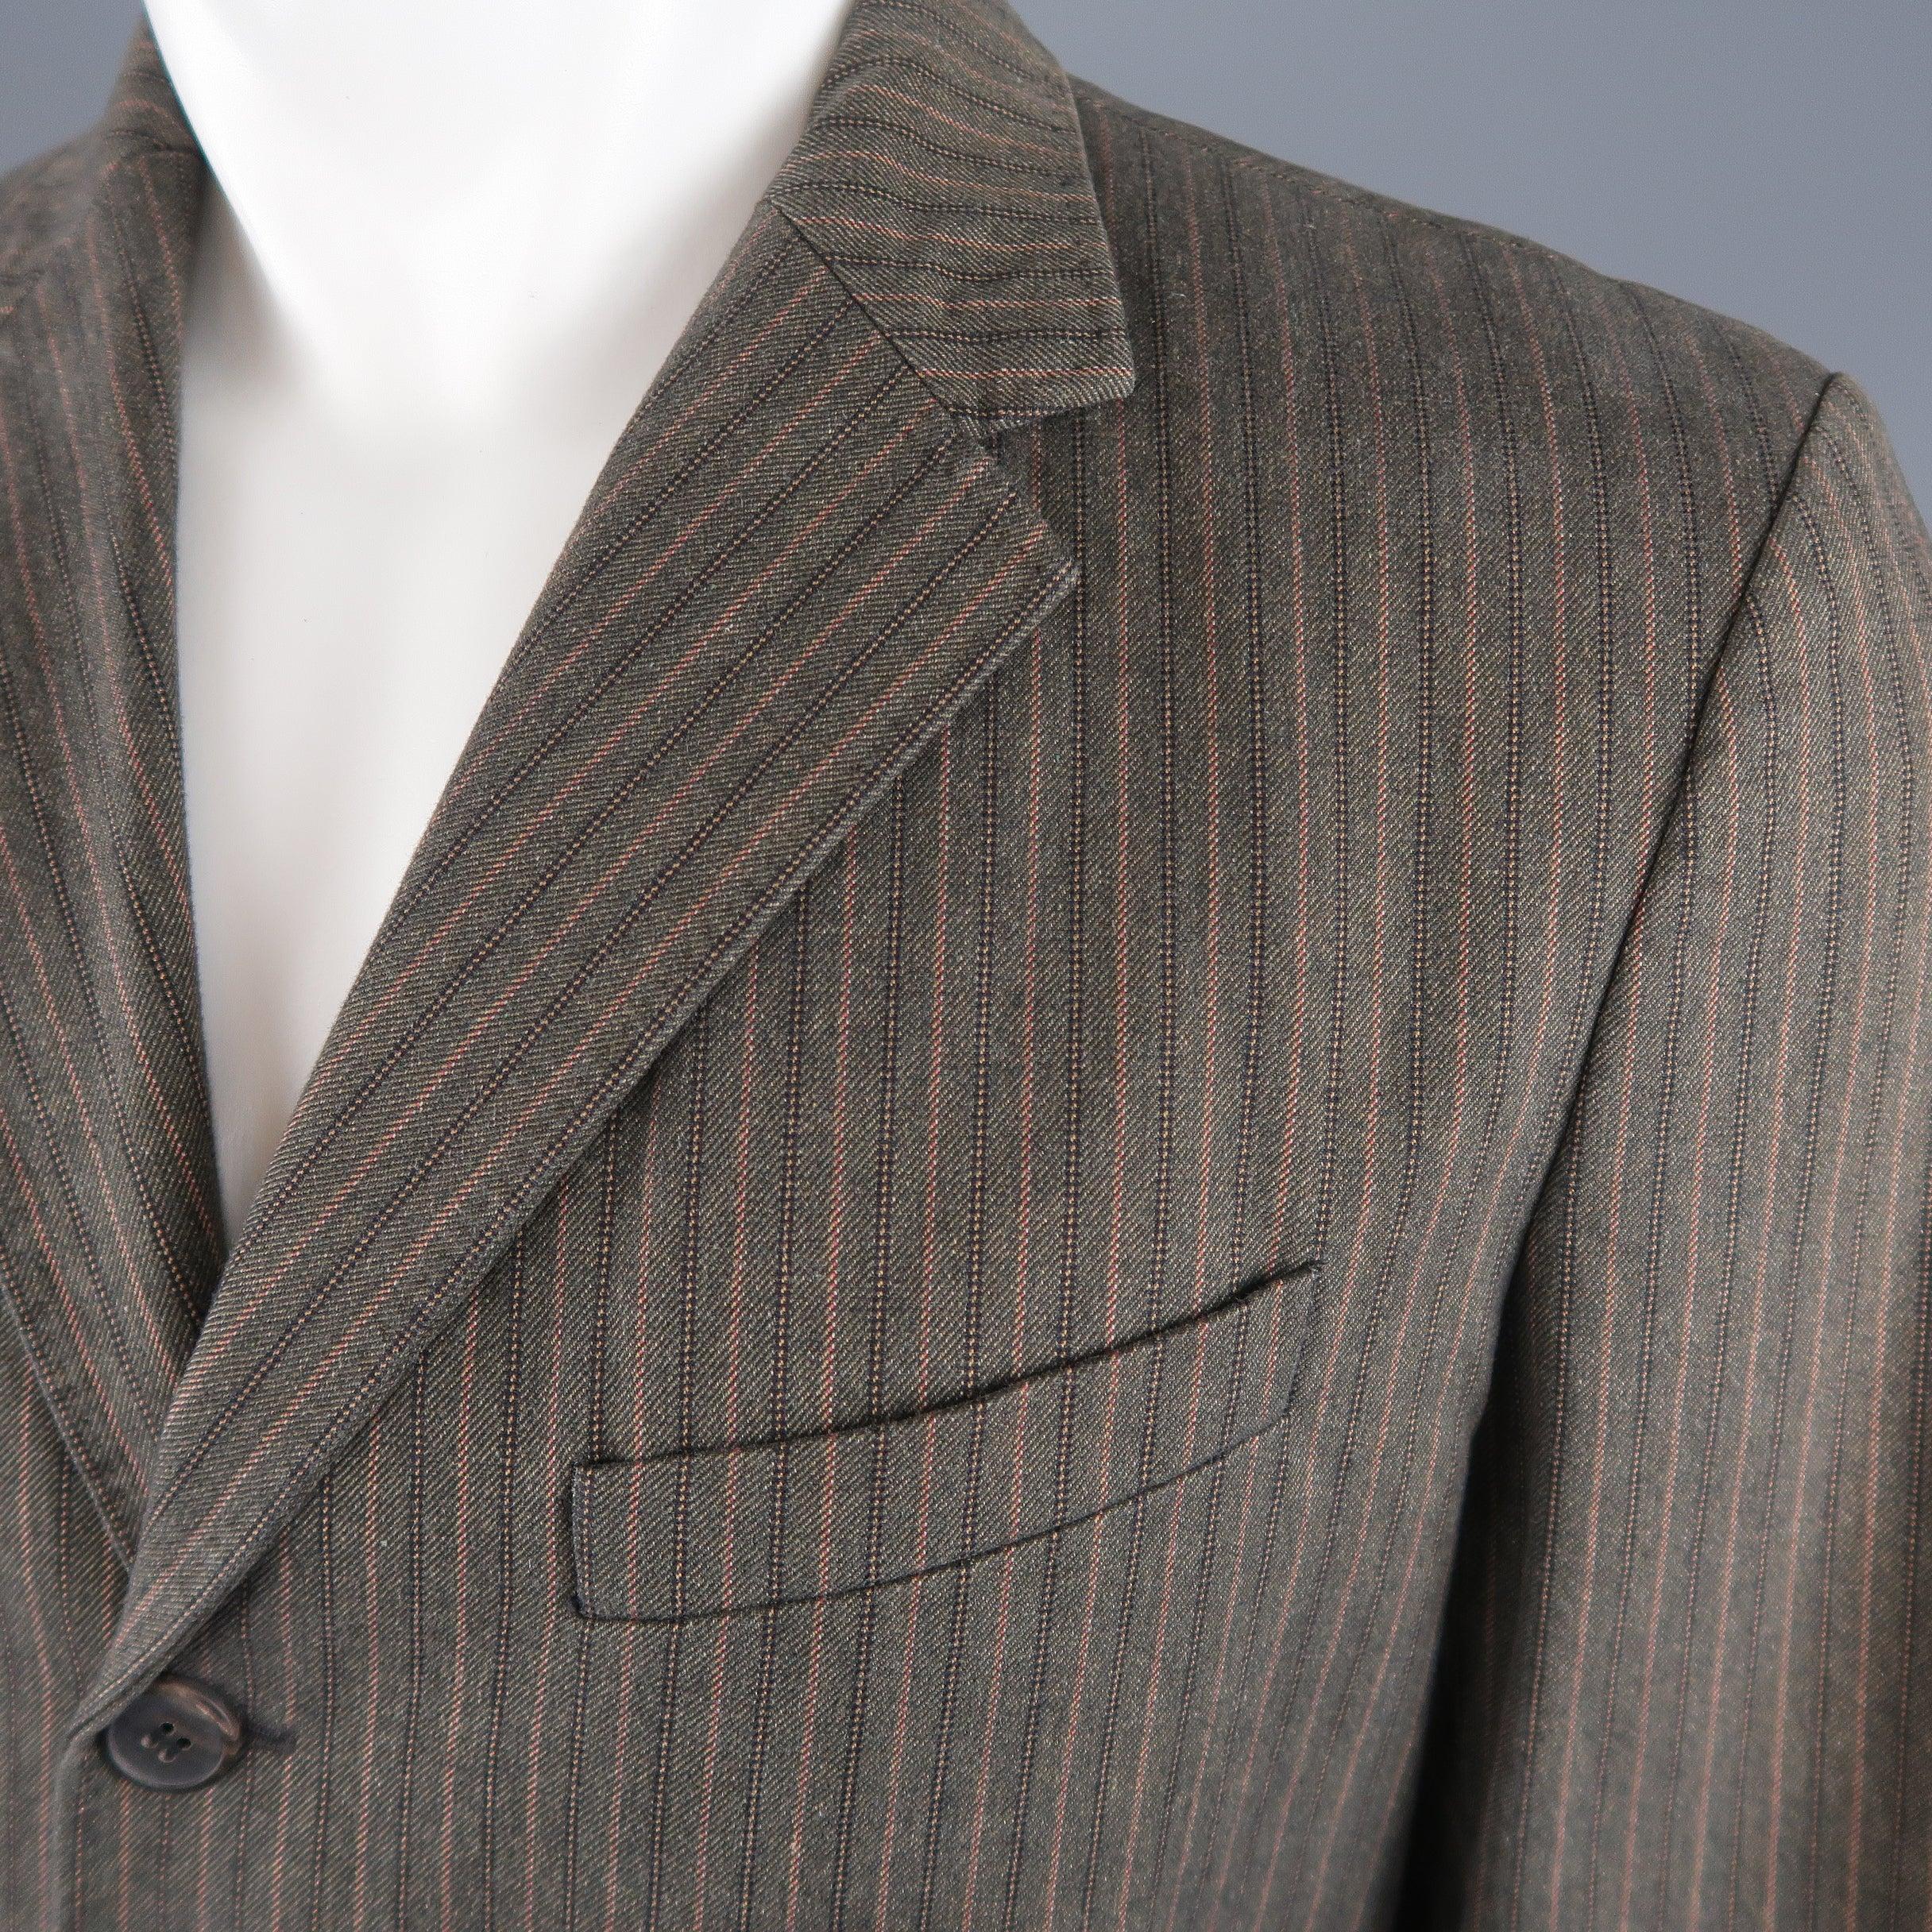 DRIES VAN NOTEN sport coat comes in taupe brown striped herringbone cotton with a notch lapel, three button single breasted front, and flap pockets. Made in Belgium.Excellent Pre-Owned Condition. 

Marked:   IT 48 

Measurements: 
 
Shoulder: 18